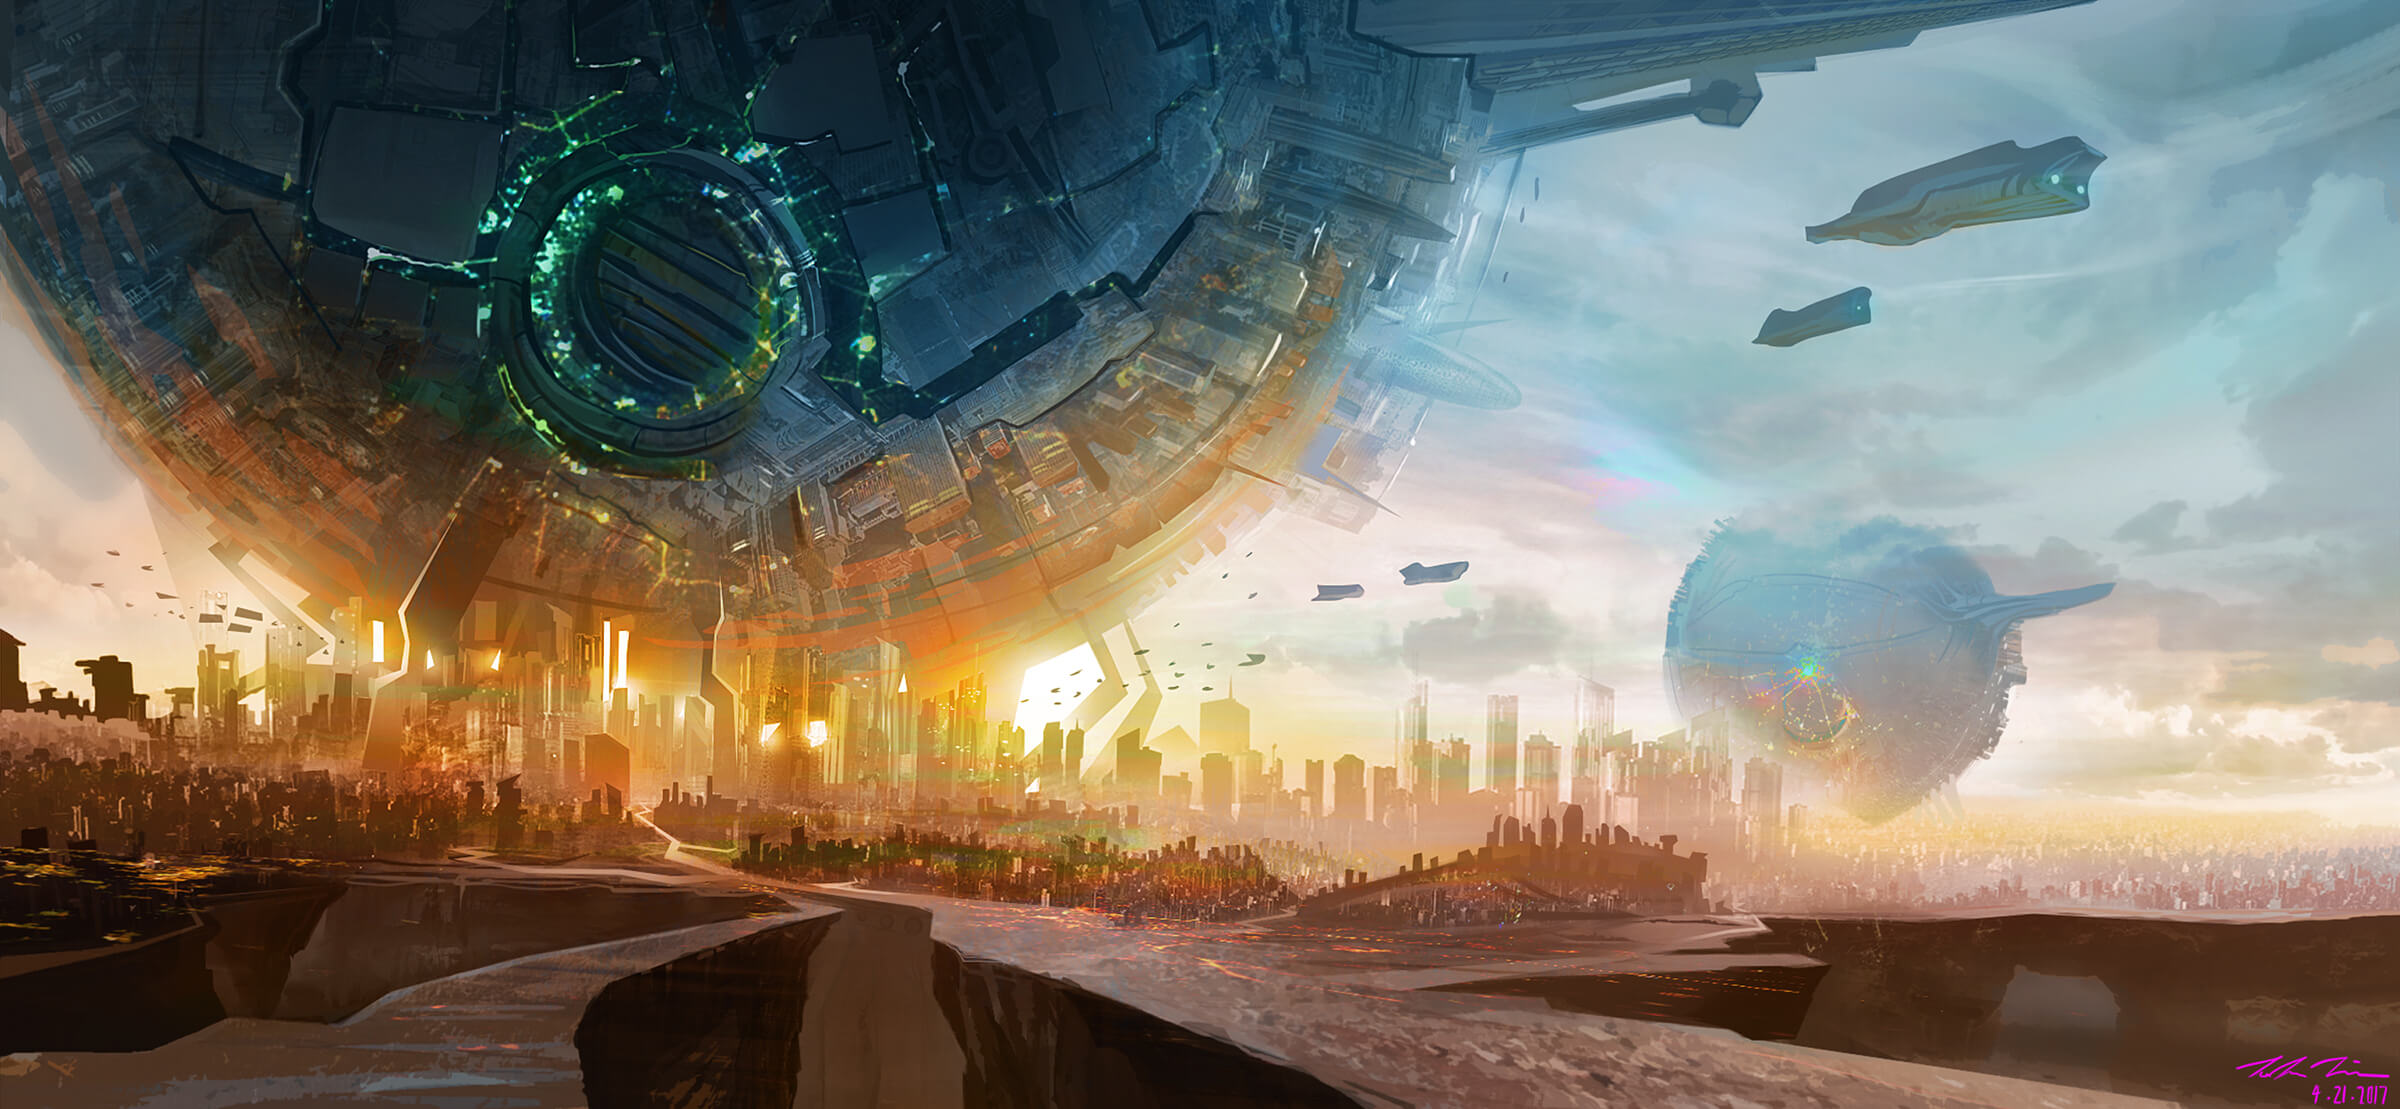 Gigantic metal sphere structures tower over futuristic cities as air/space-ships fly through the sky.